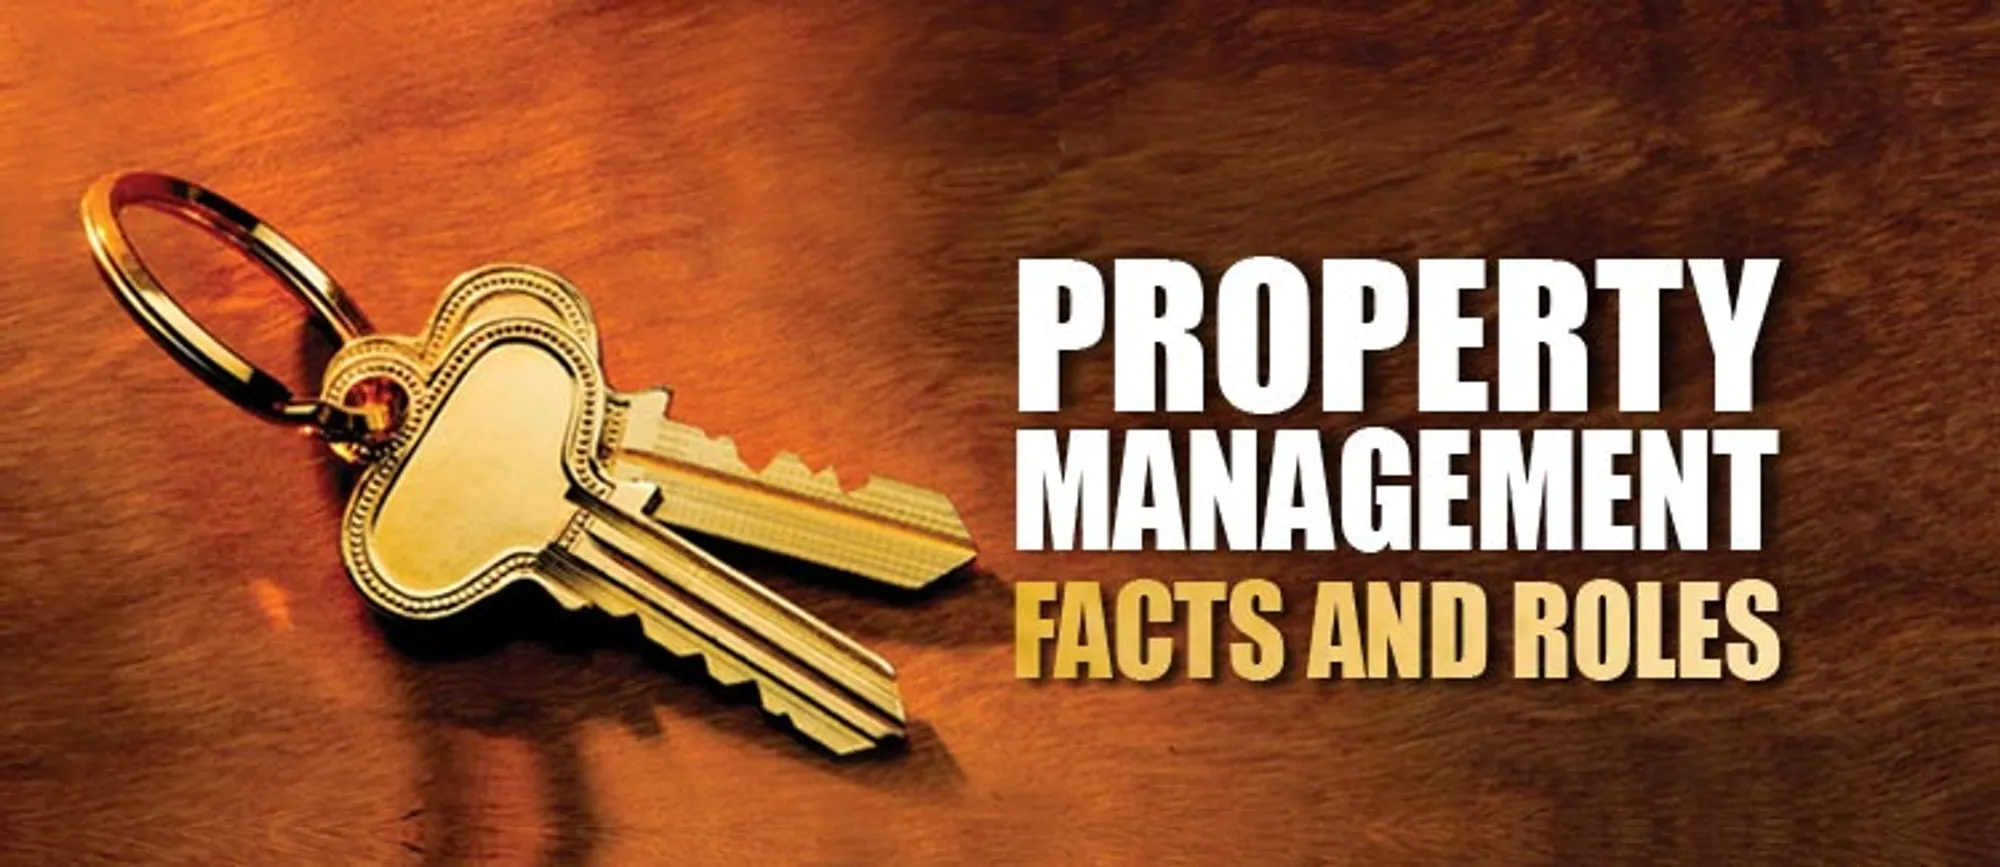 Property Management Lawyers Facts and Roles